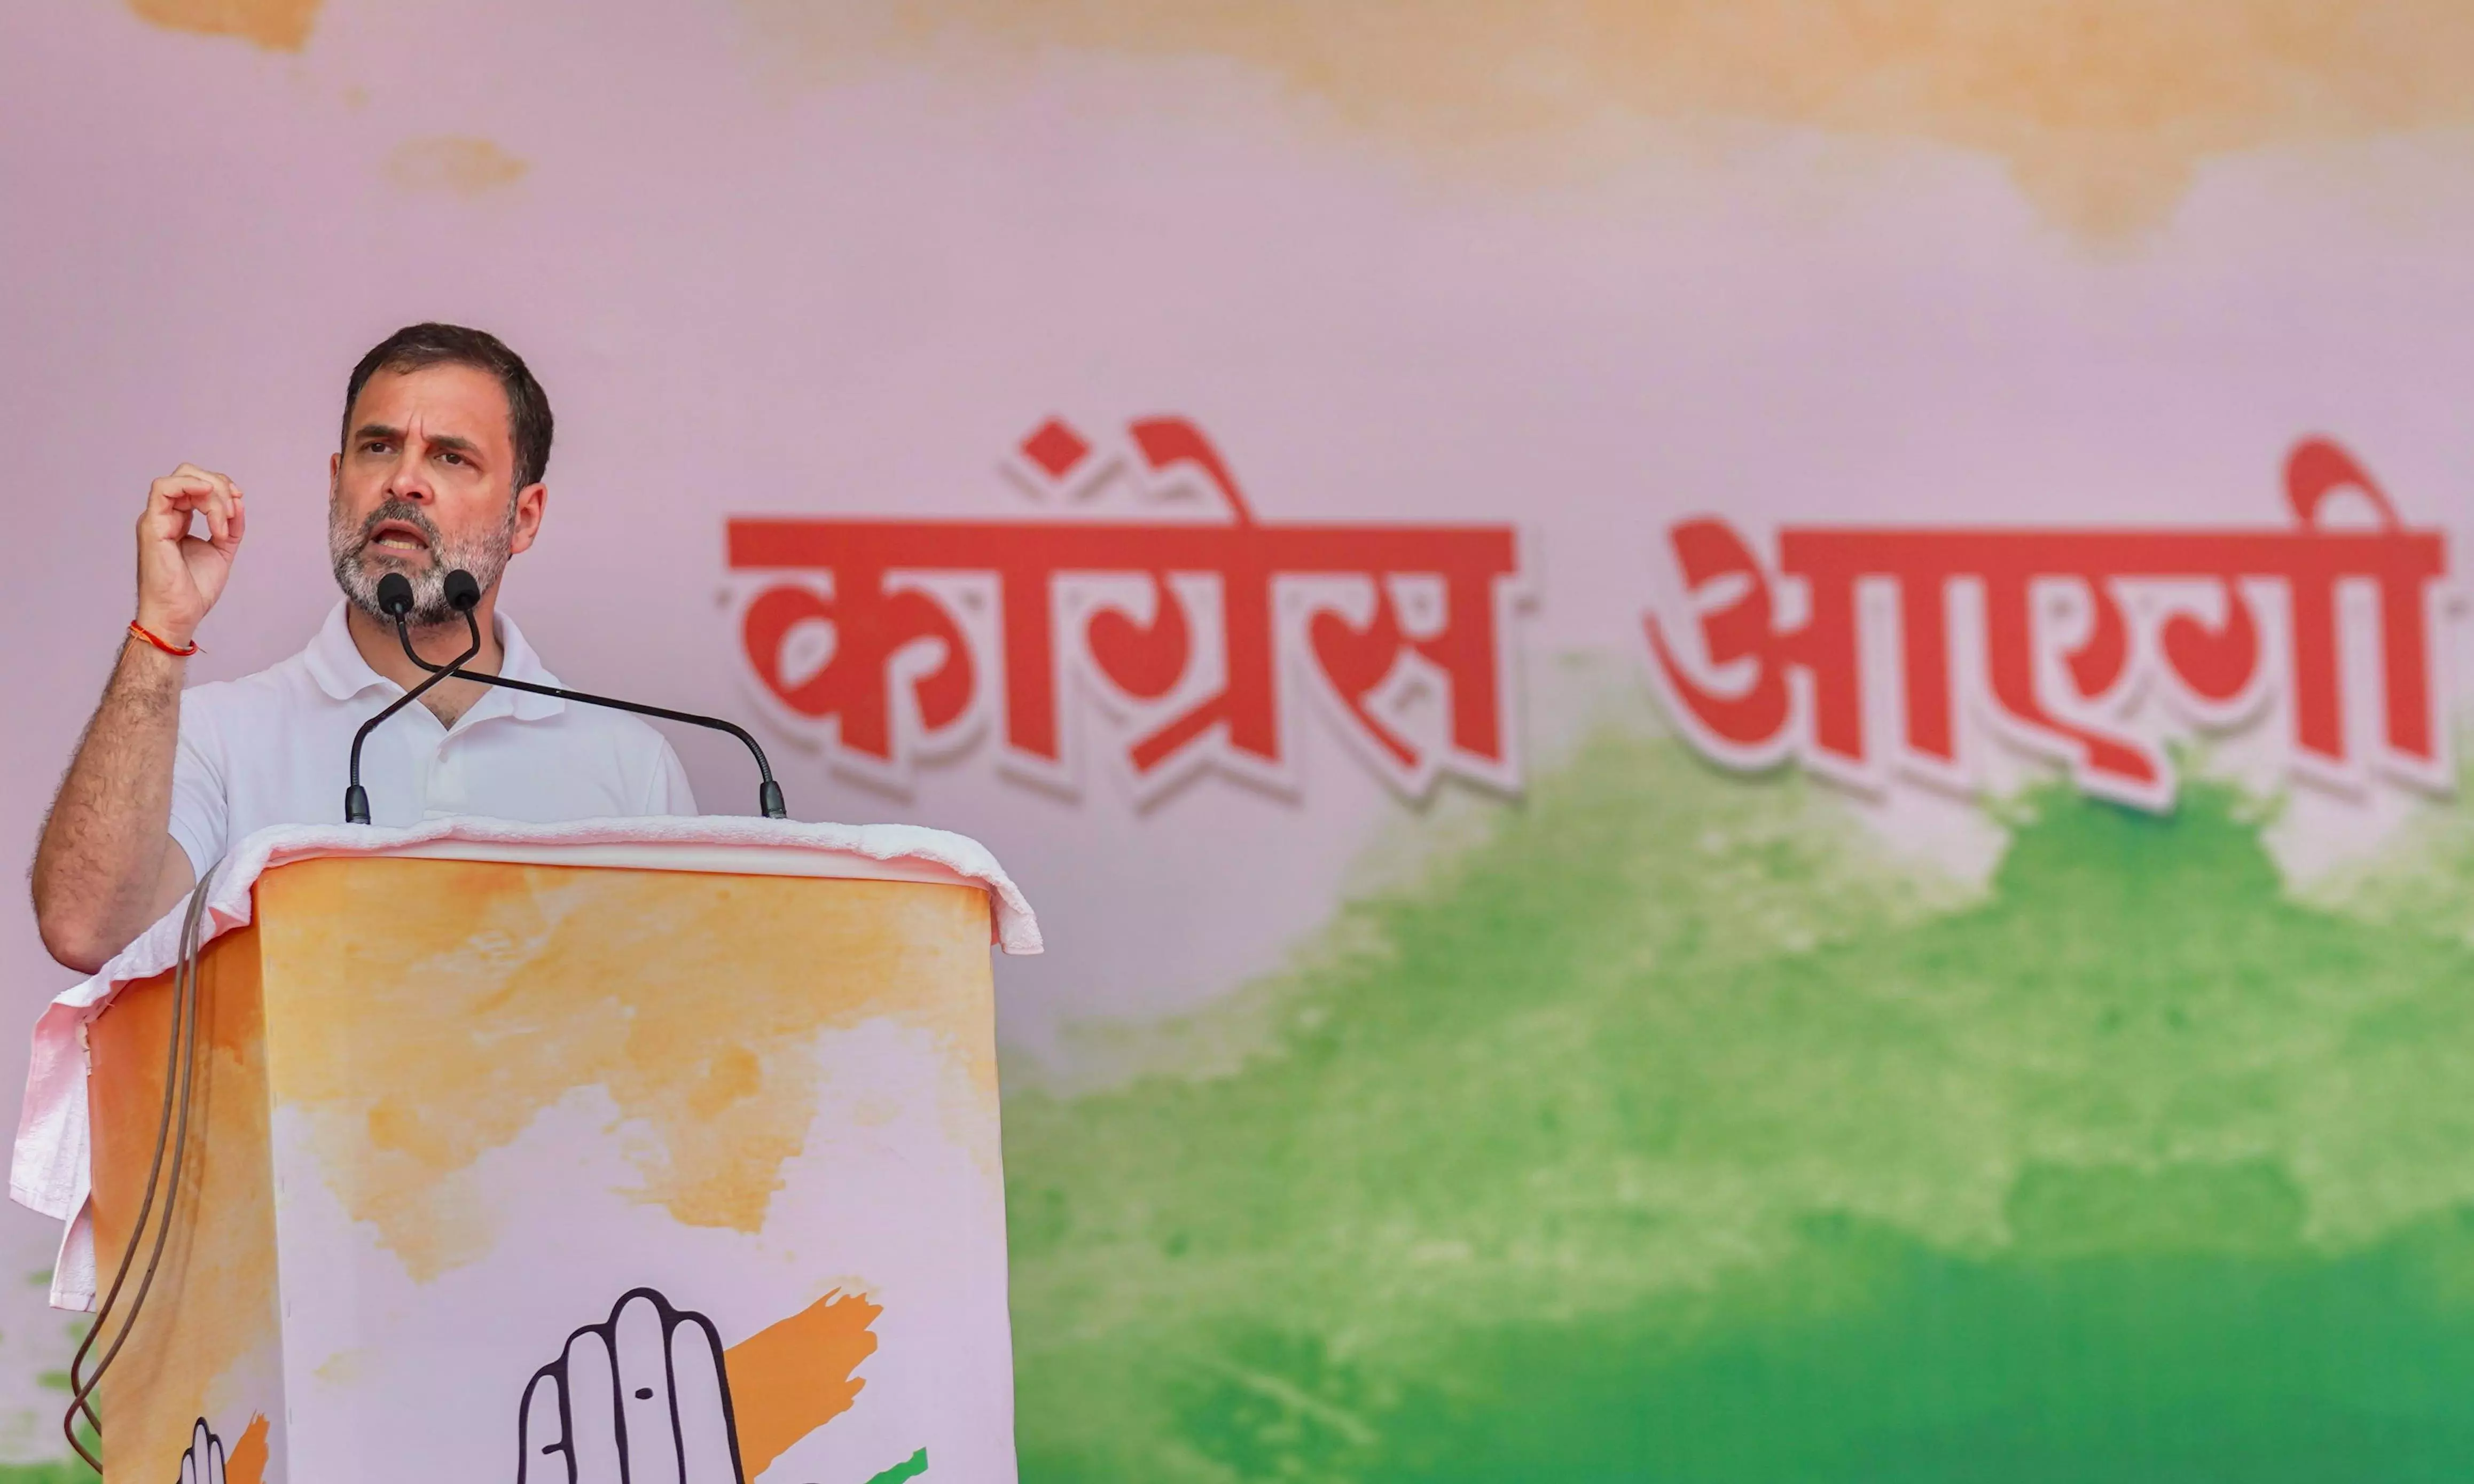 Caste census is revolutionary, life-changing step for people: Rahul Gandhi in MP